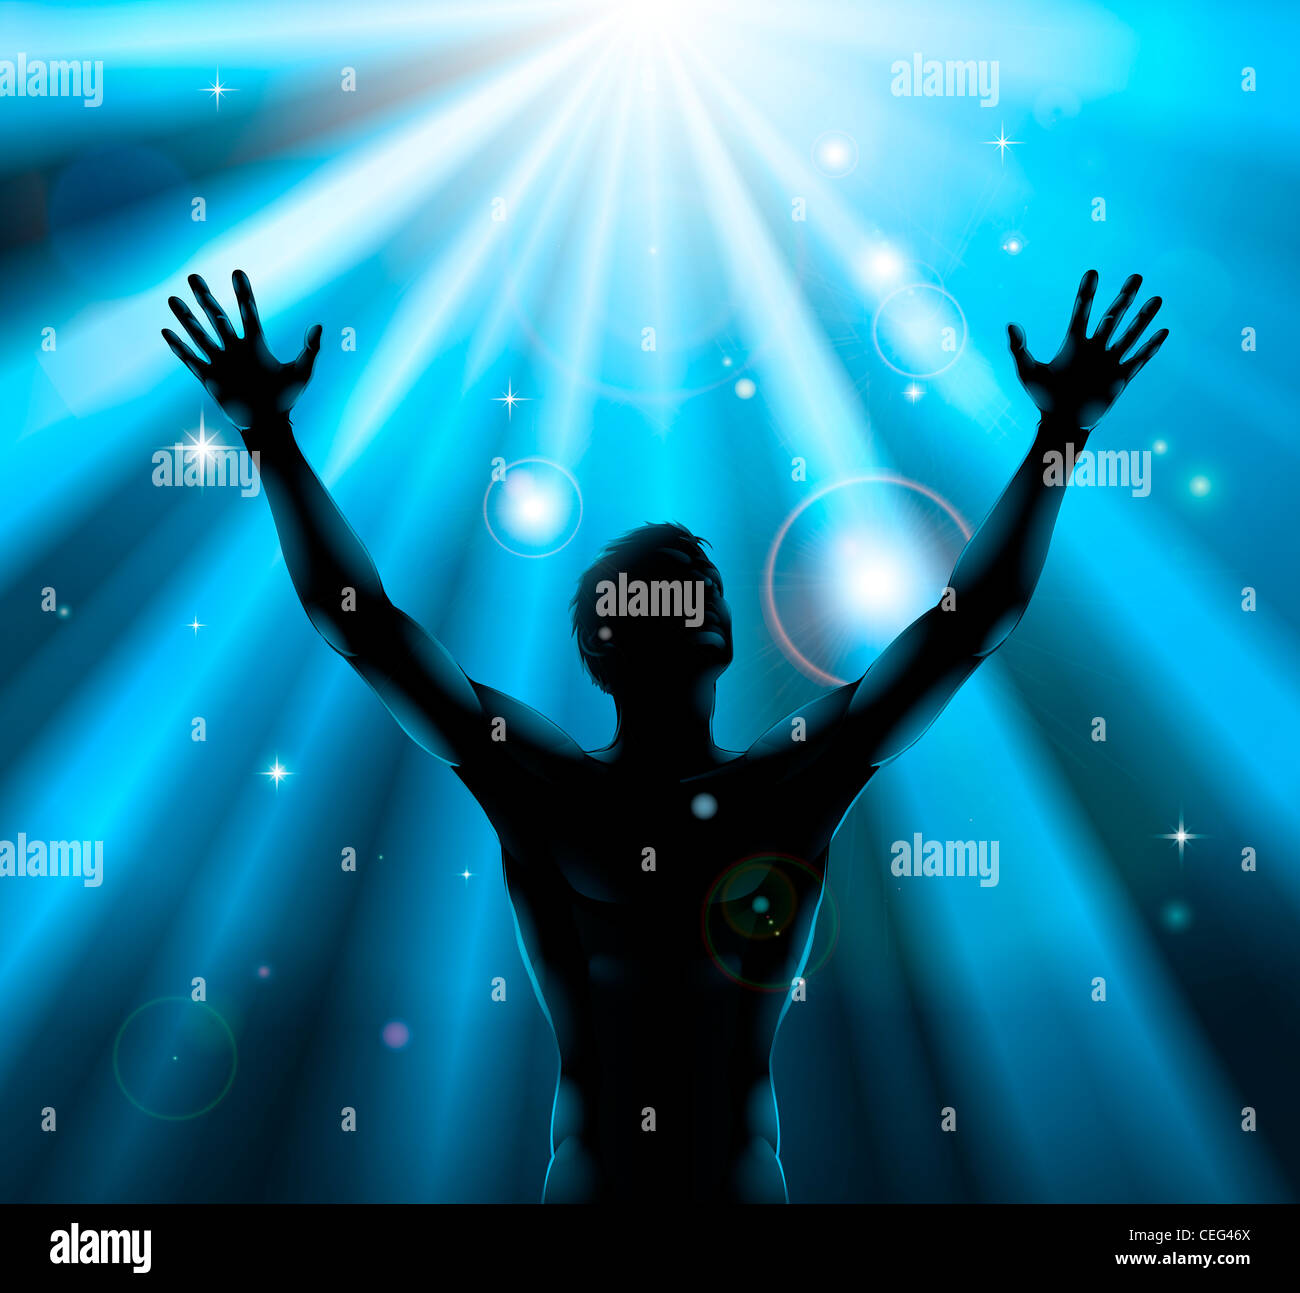 A man with hands held up in silhouette with light rays in the background Stock Photo